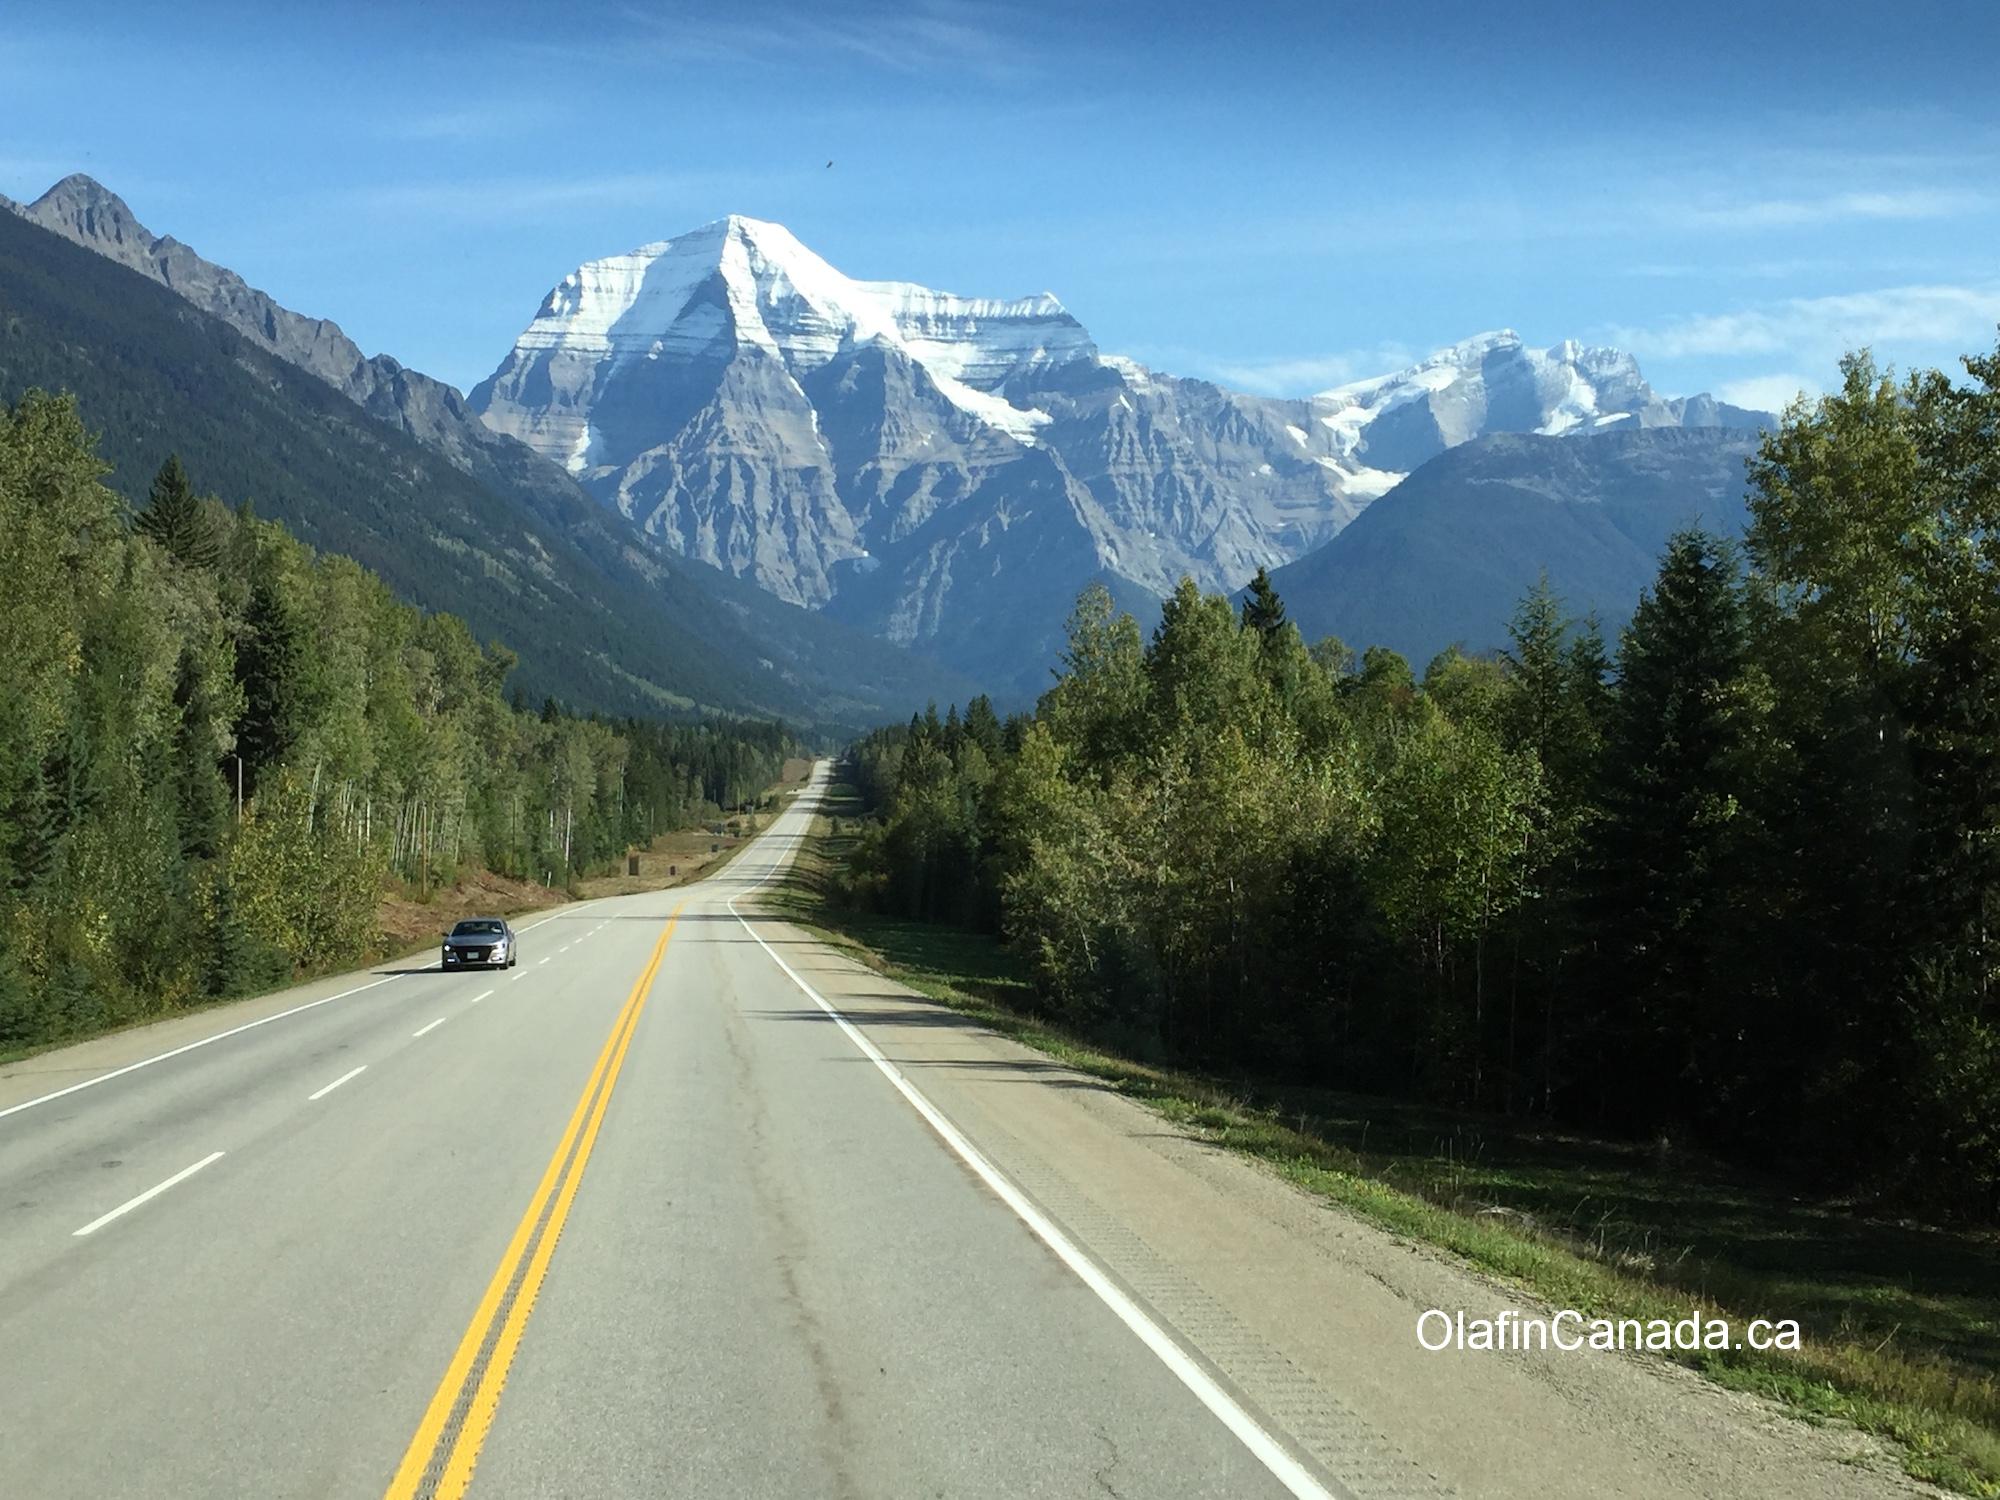 Mount Robson in the sun from the highway driving east #olafincanada #britishcolumbia #discoverbc #mountrobson #sunshine